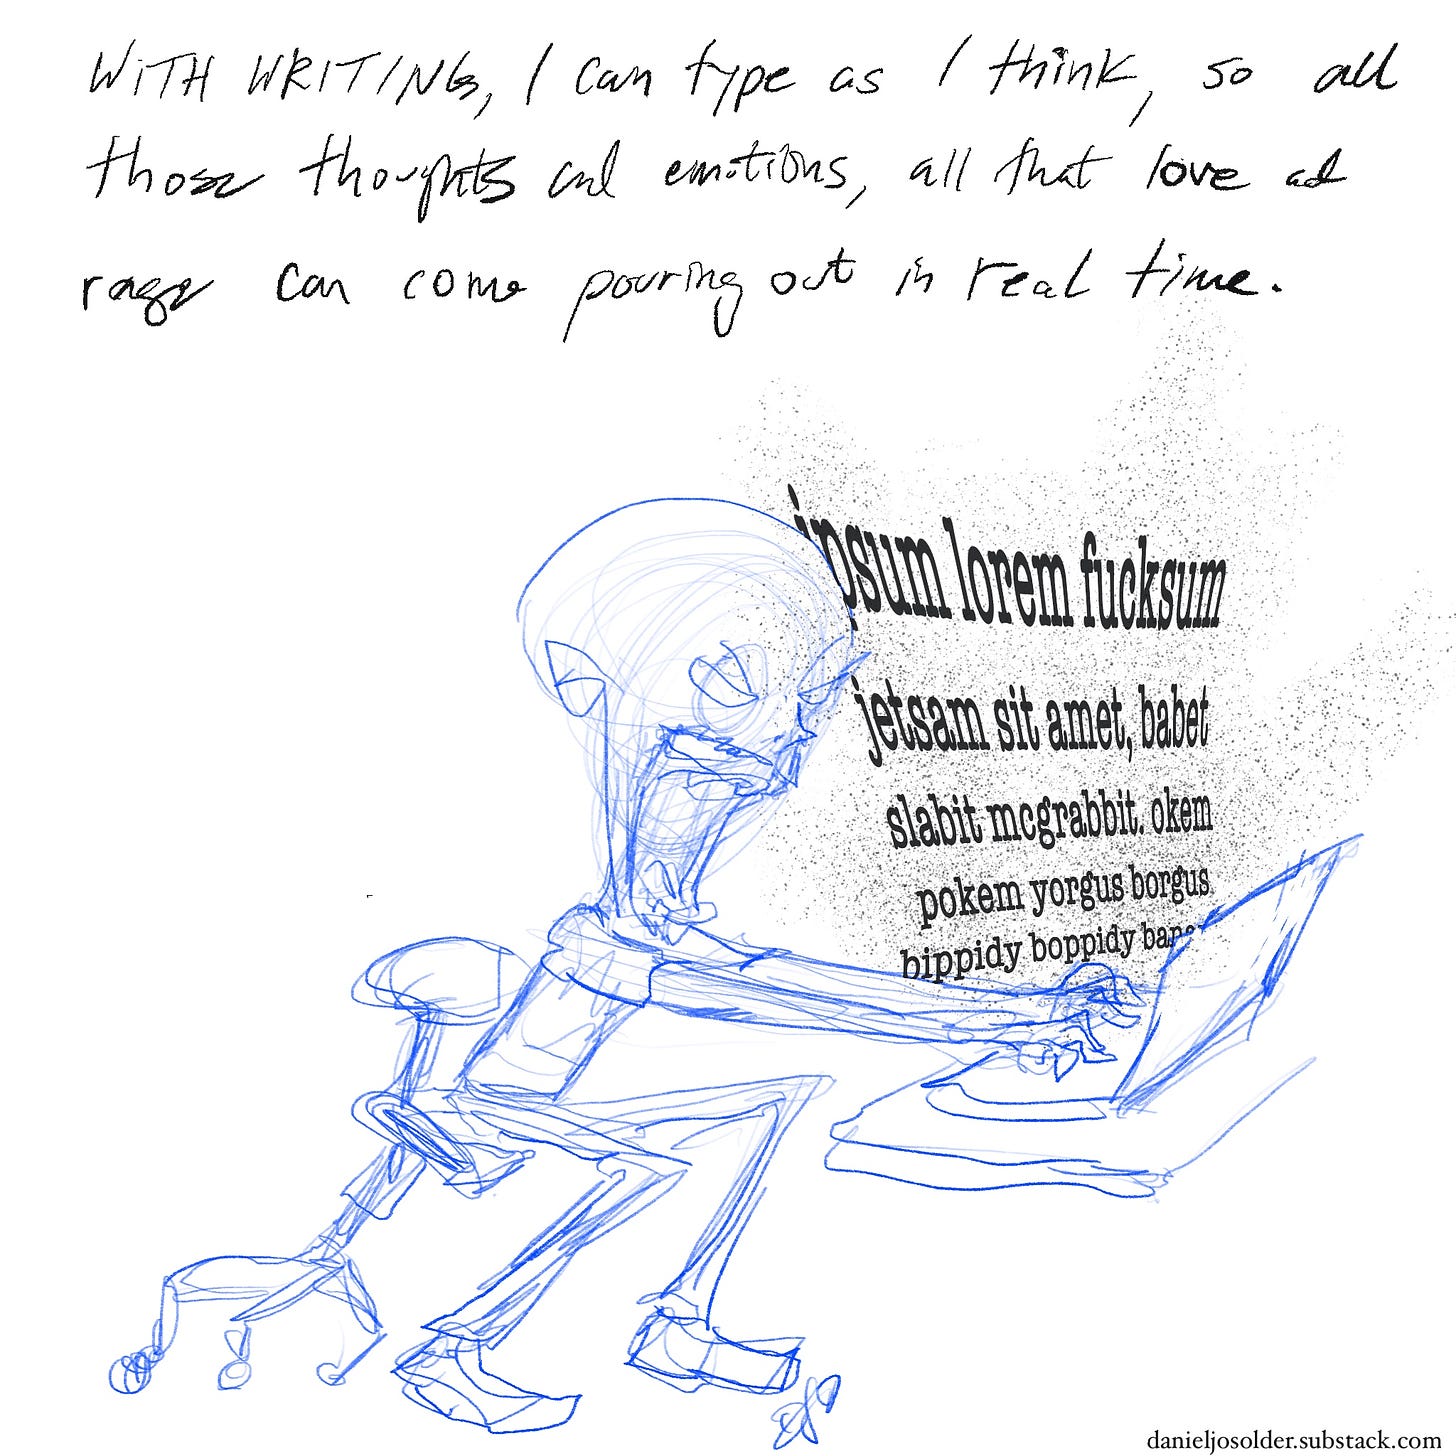 With writing, I can type as I think, so all those thoughts and emotions, all that love and rage can come pouring out in real time." Image description: Drawing of Daniel fervently typing on a computer. His face is screaming in rage.